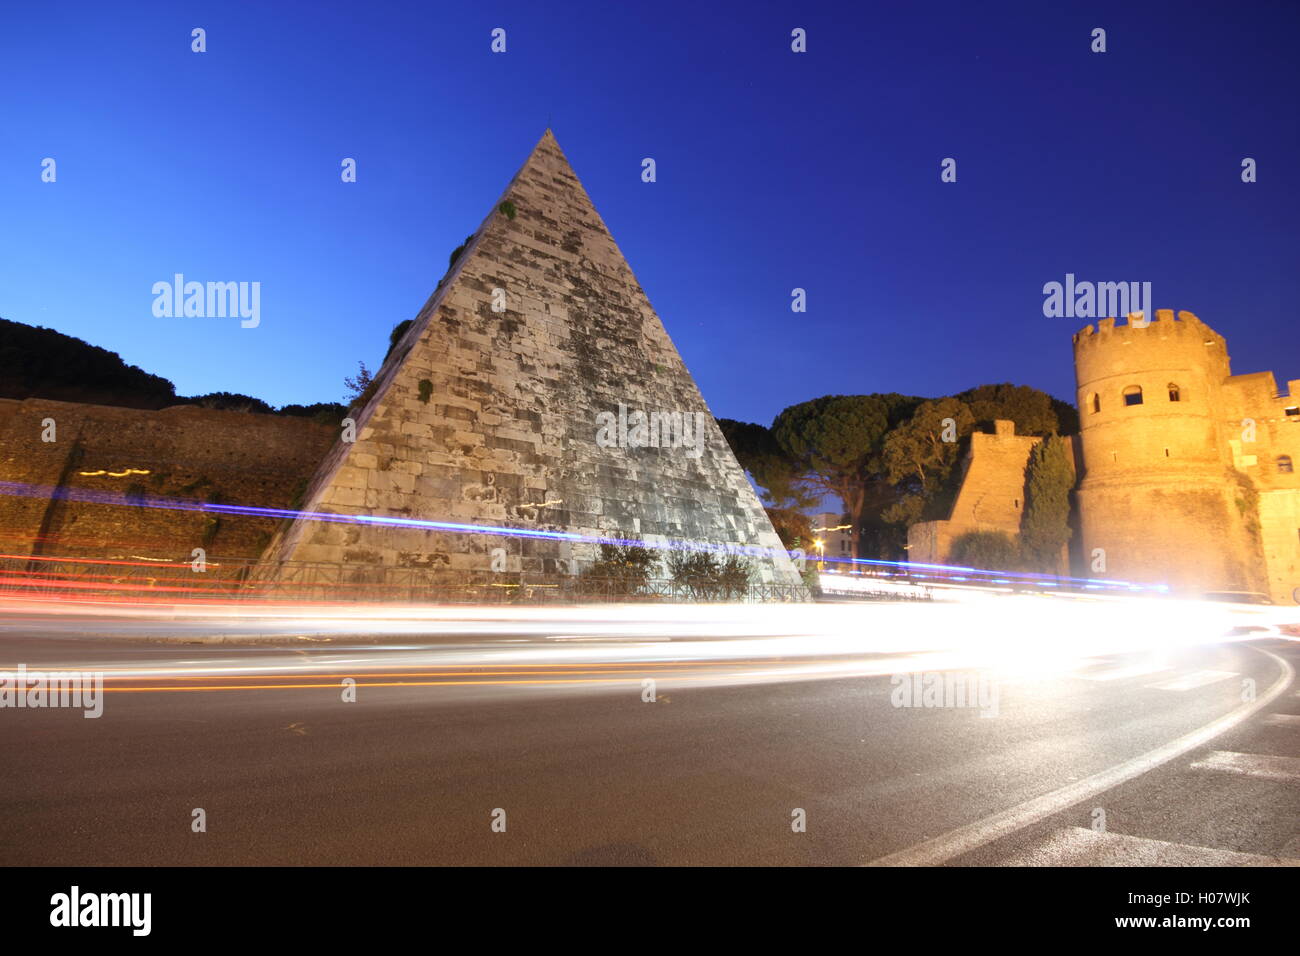 a stunning shot of the Egyptian style pyramid in the city of Rome by night, 'Piramide Cestia', Rome, Italy Stock Photo